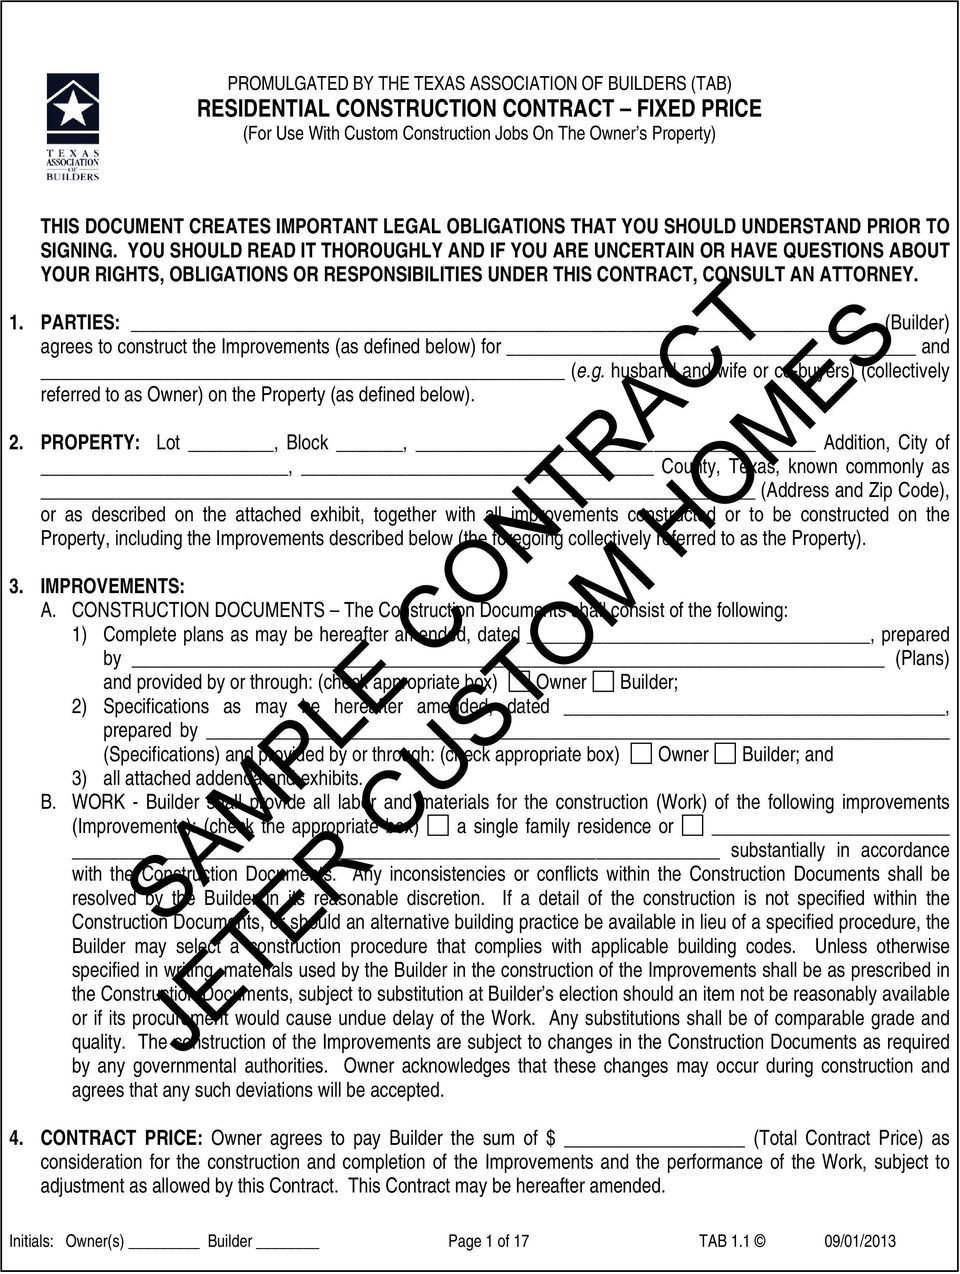 Residential Construction Contract Fixed Price Pdf Free Download